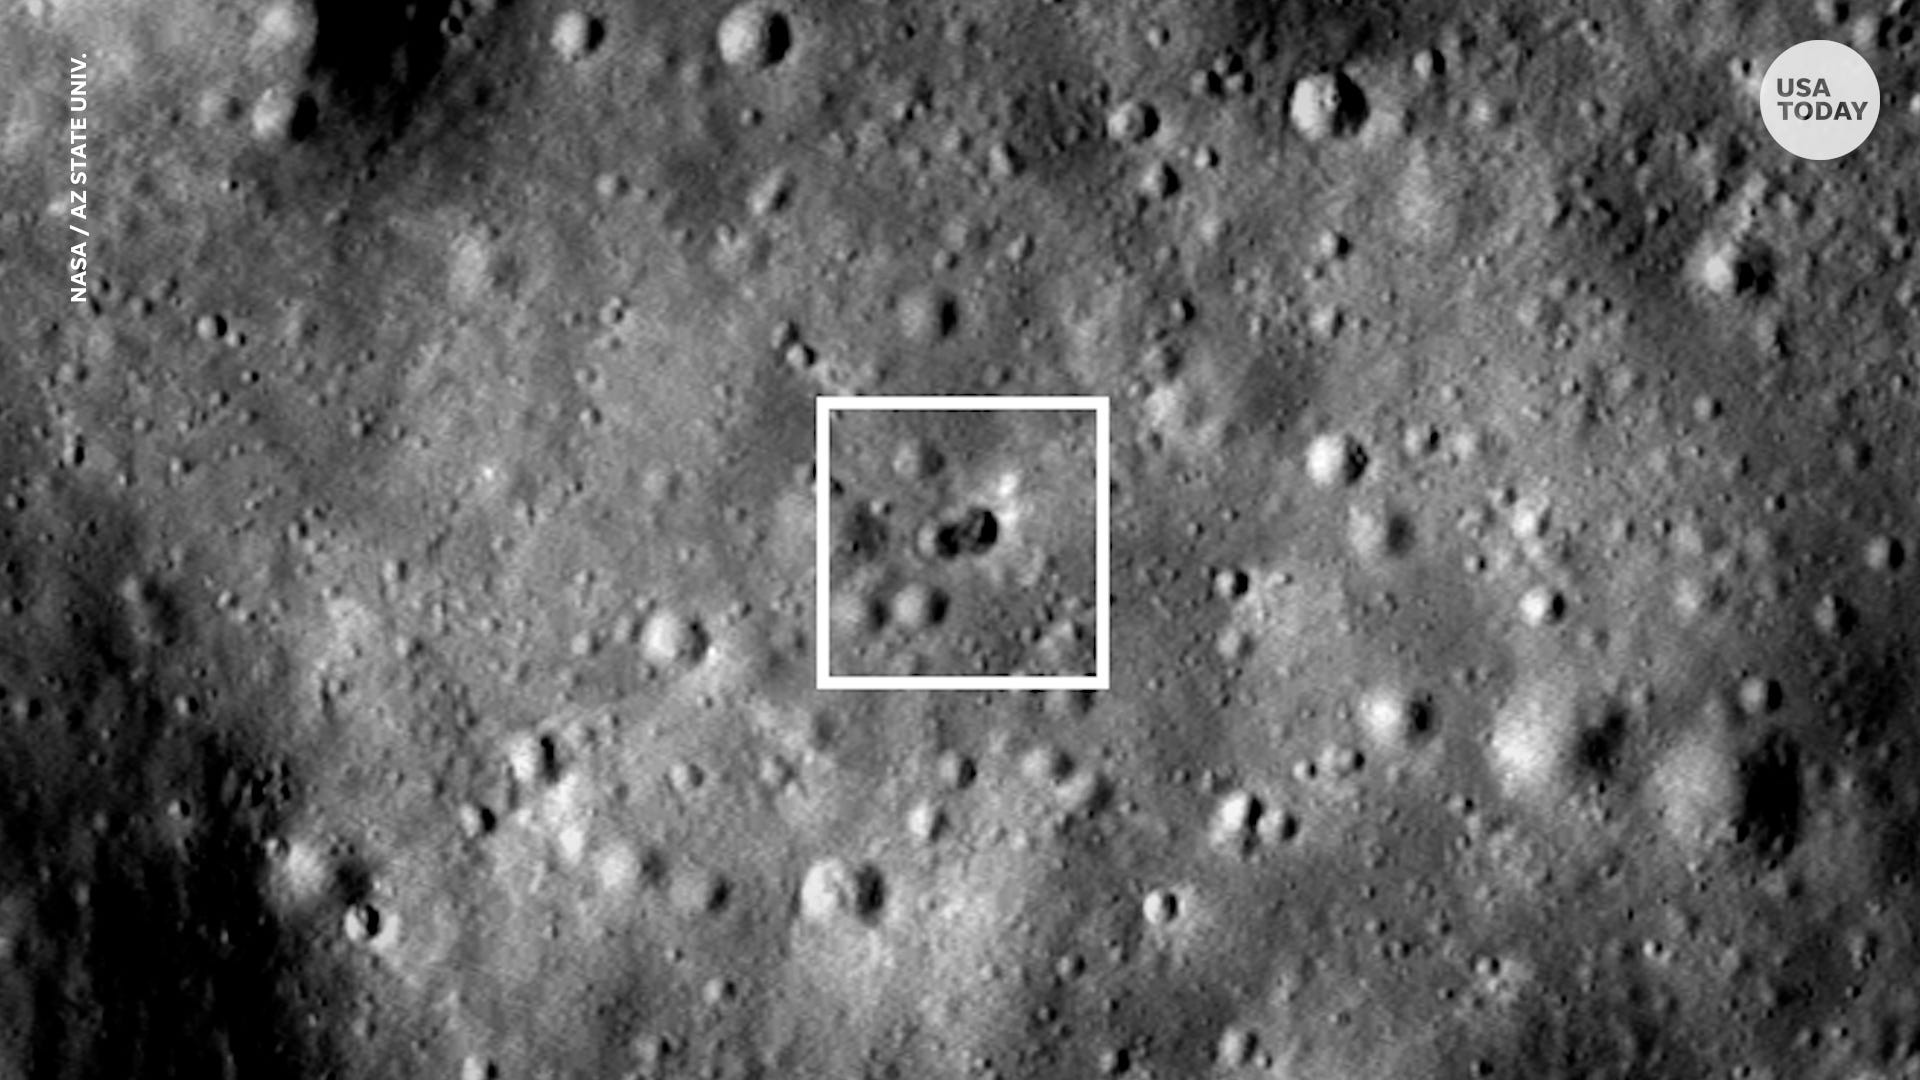 Mysterious rocket crash site creates odd double crater on moon, astronomers say